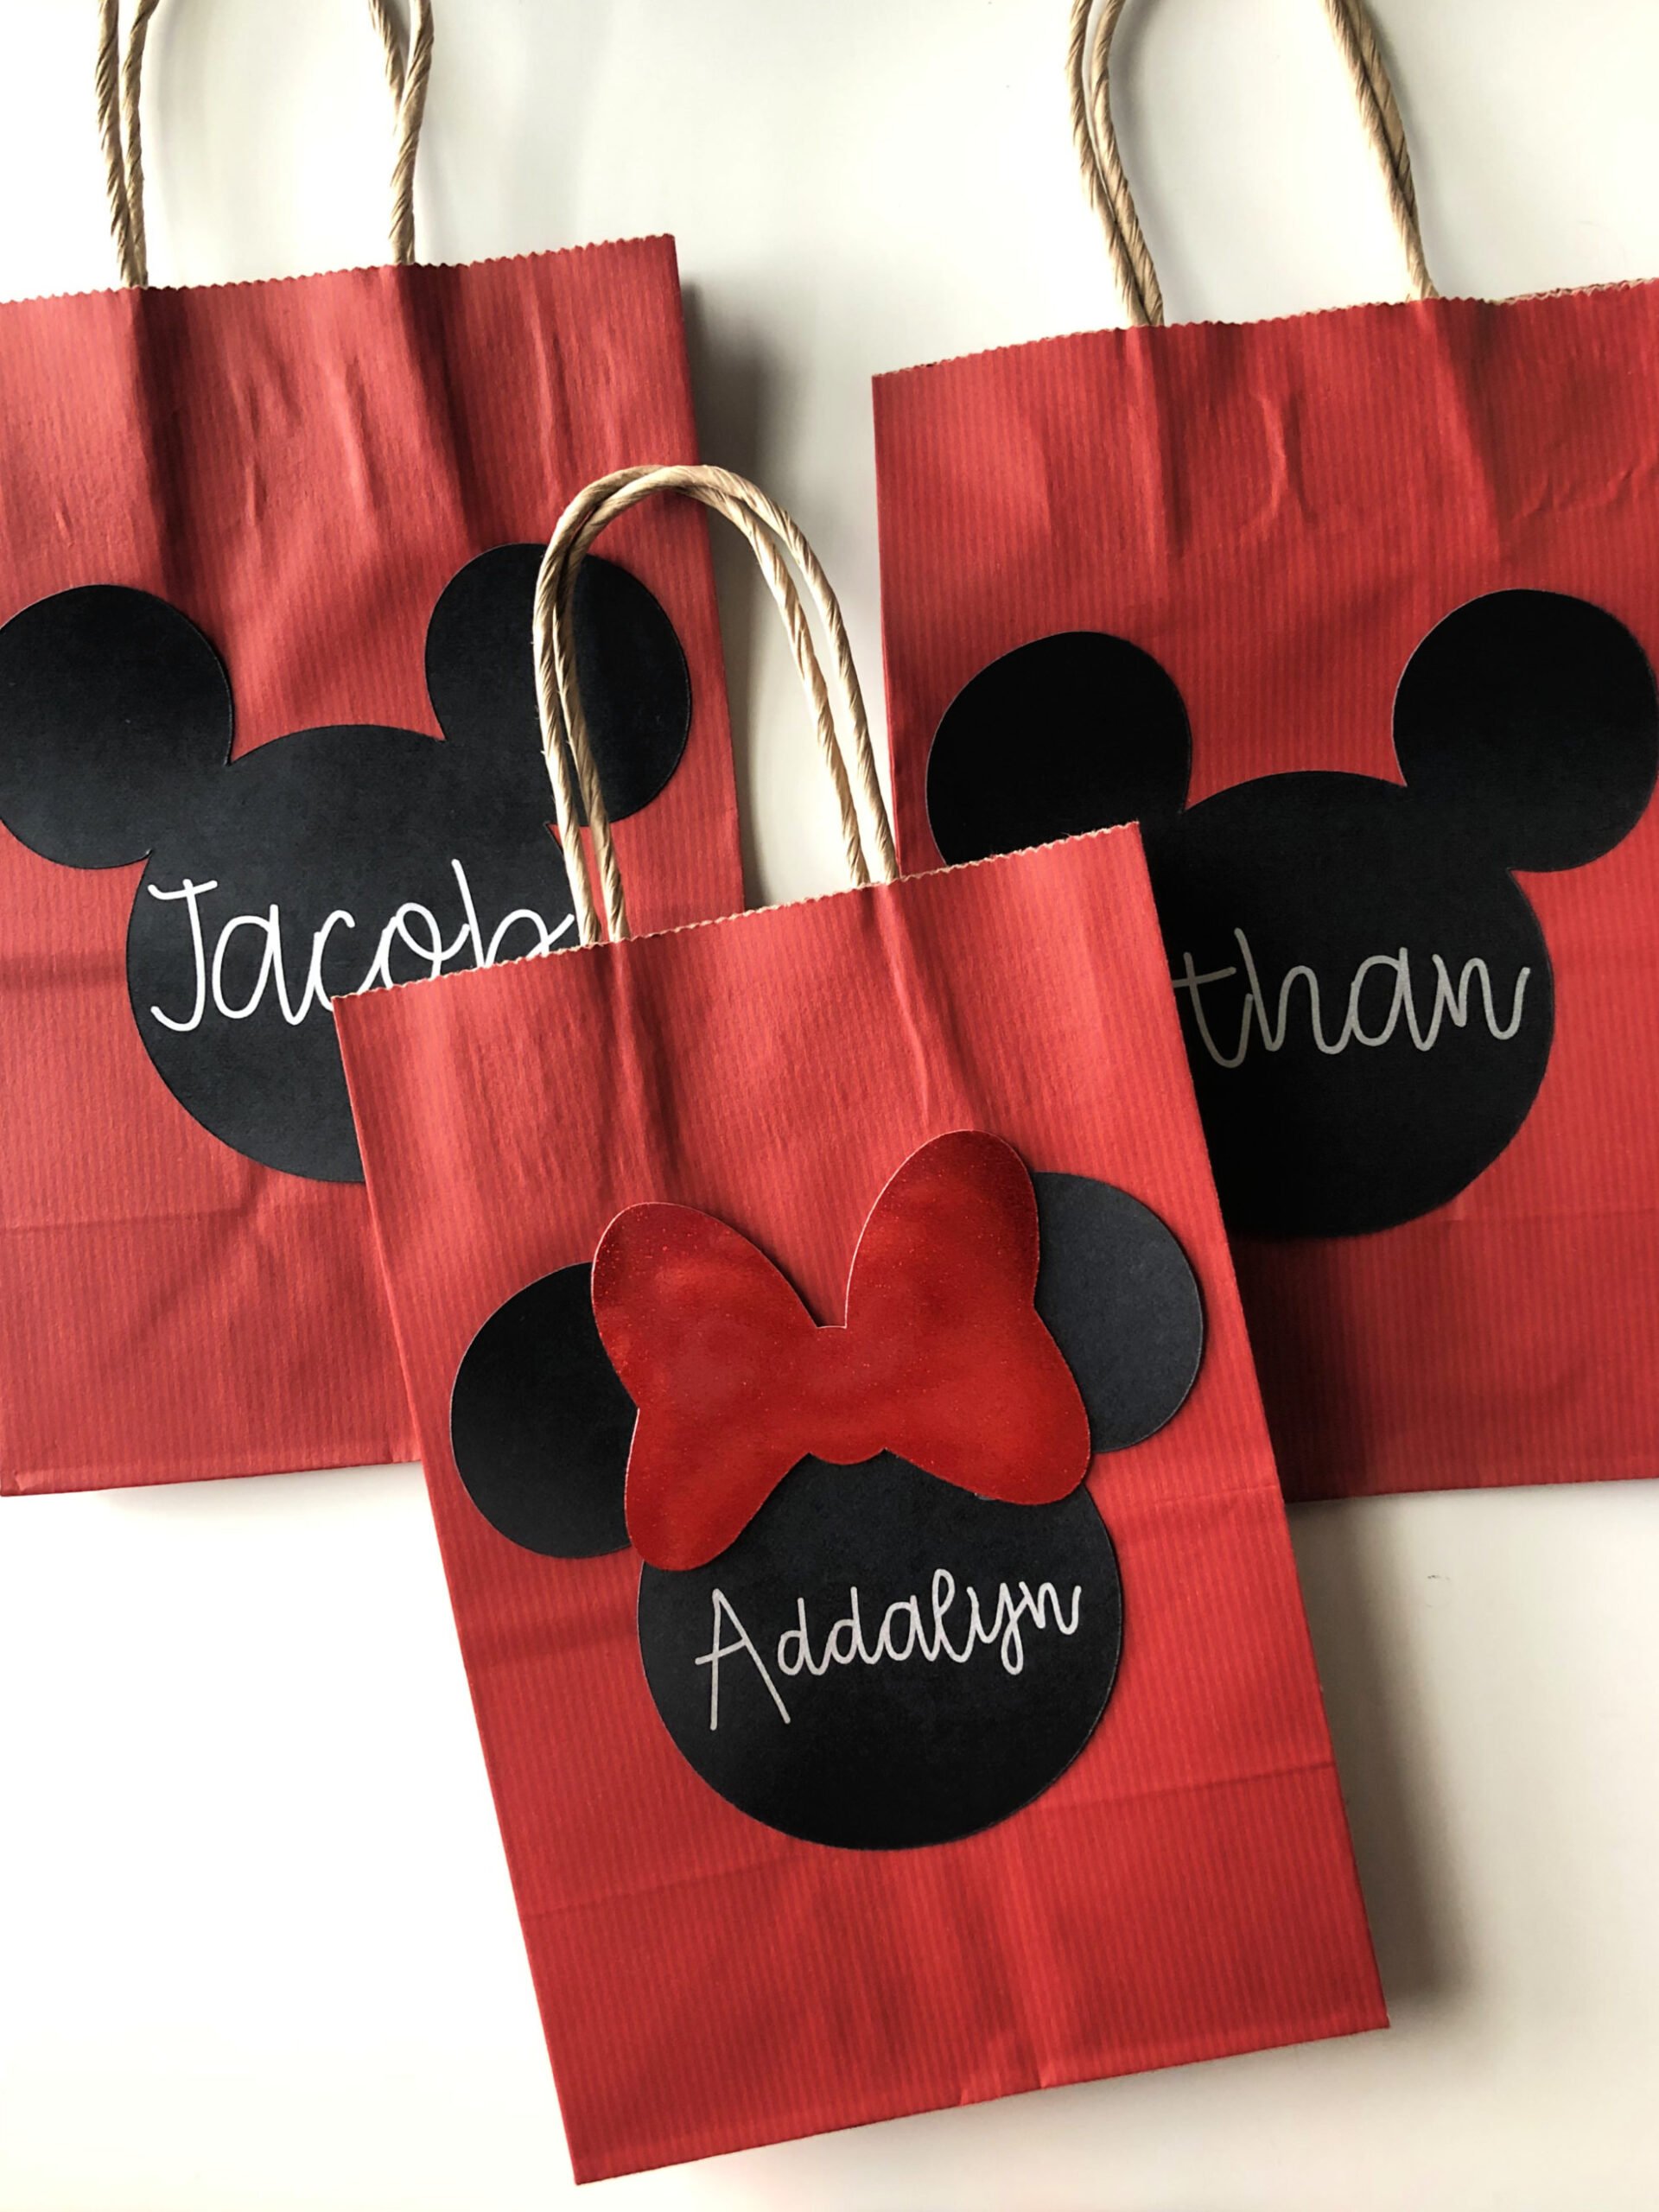 DIY Gift Bags with Paper / Theme Party Favor Bags for Girls / Goodie Bags  Ideas for Birthday Party 